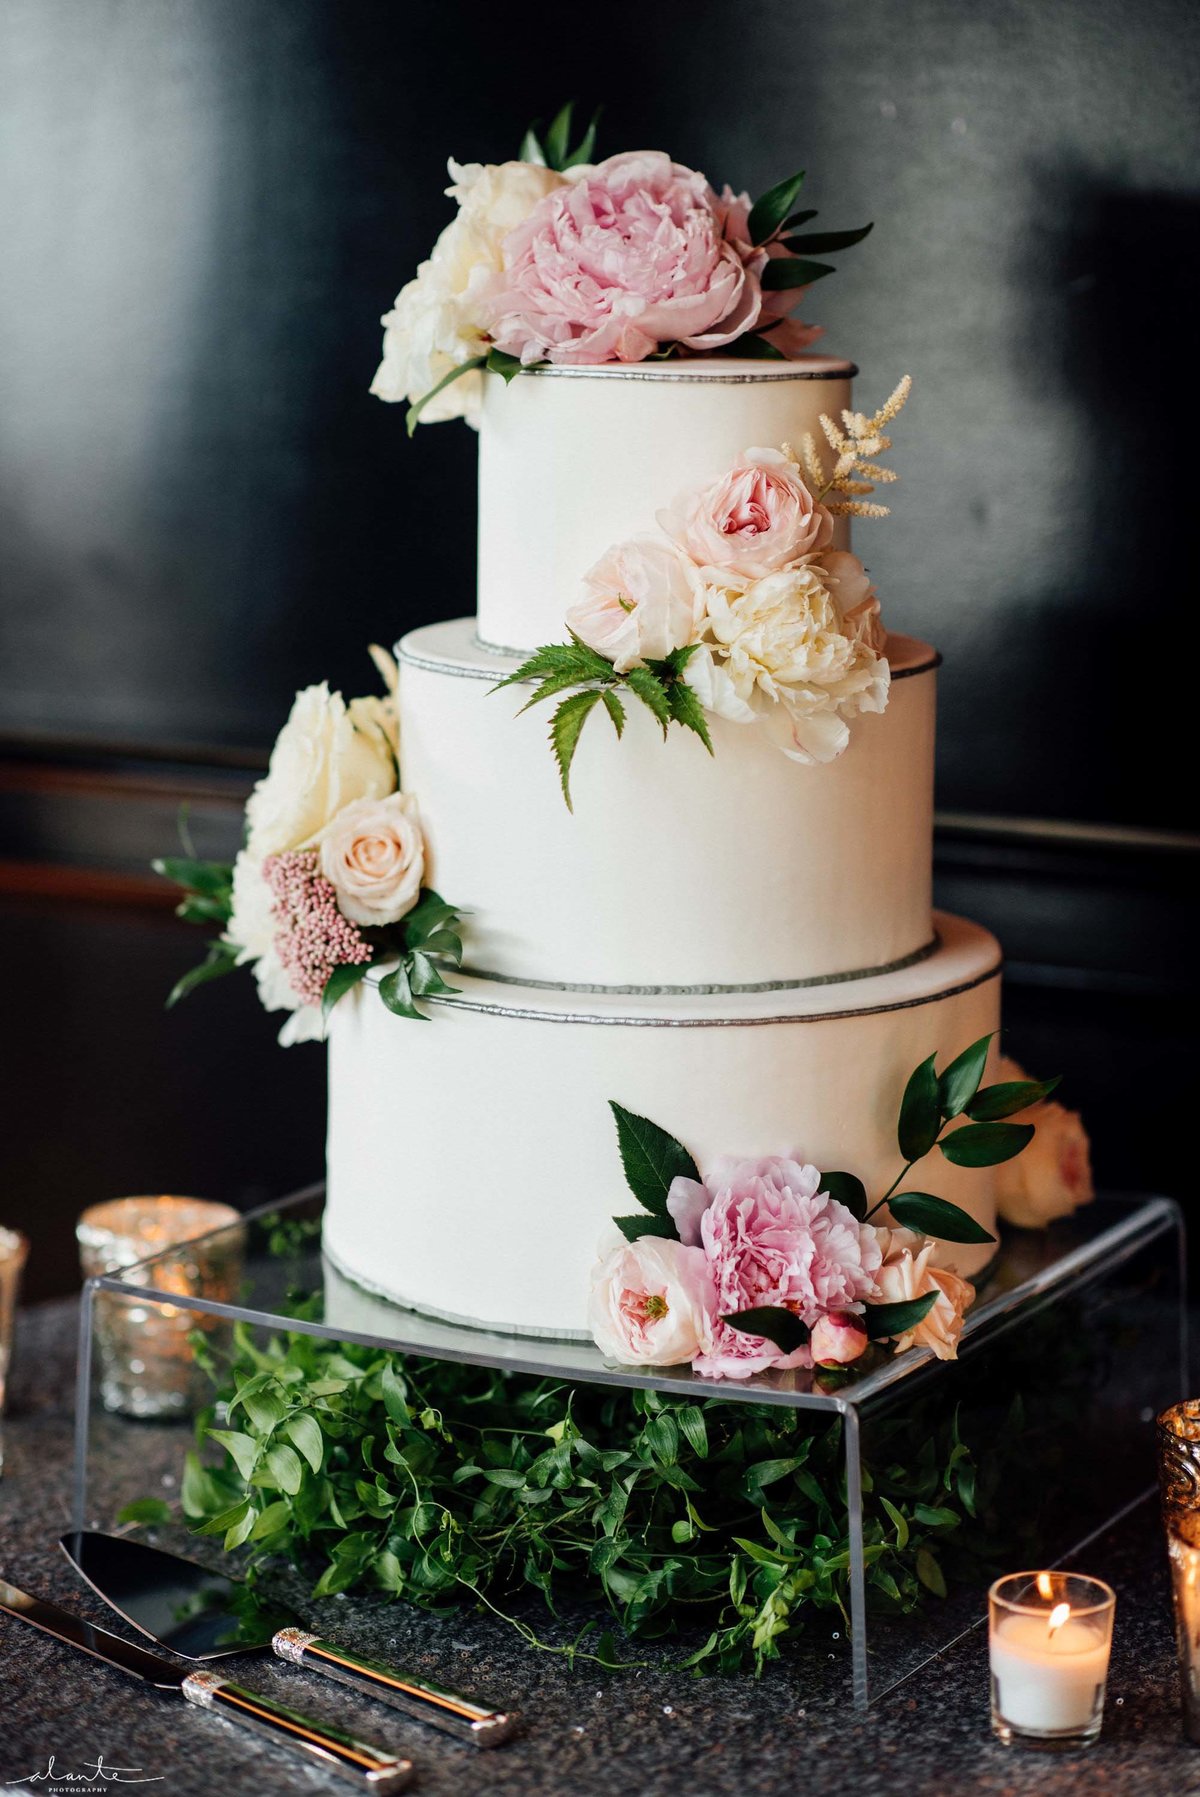 Beautiful white layer cake with peonies, astilbe and roses.